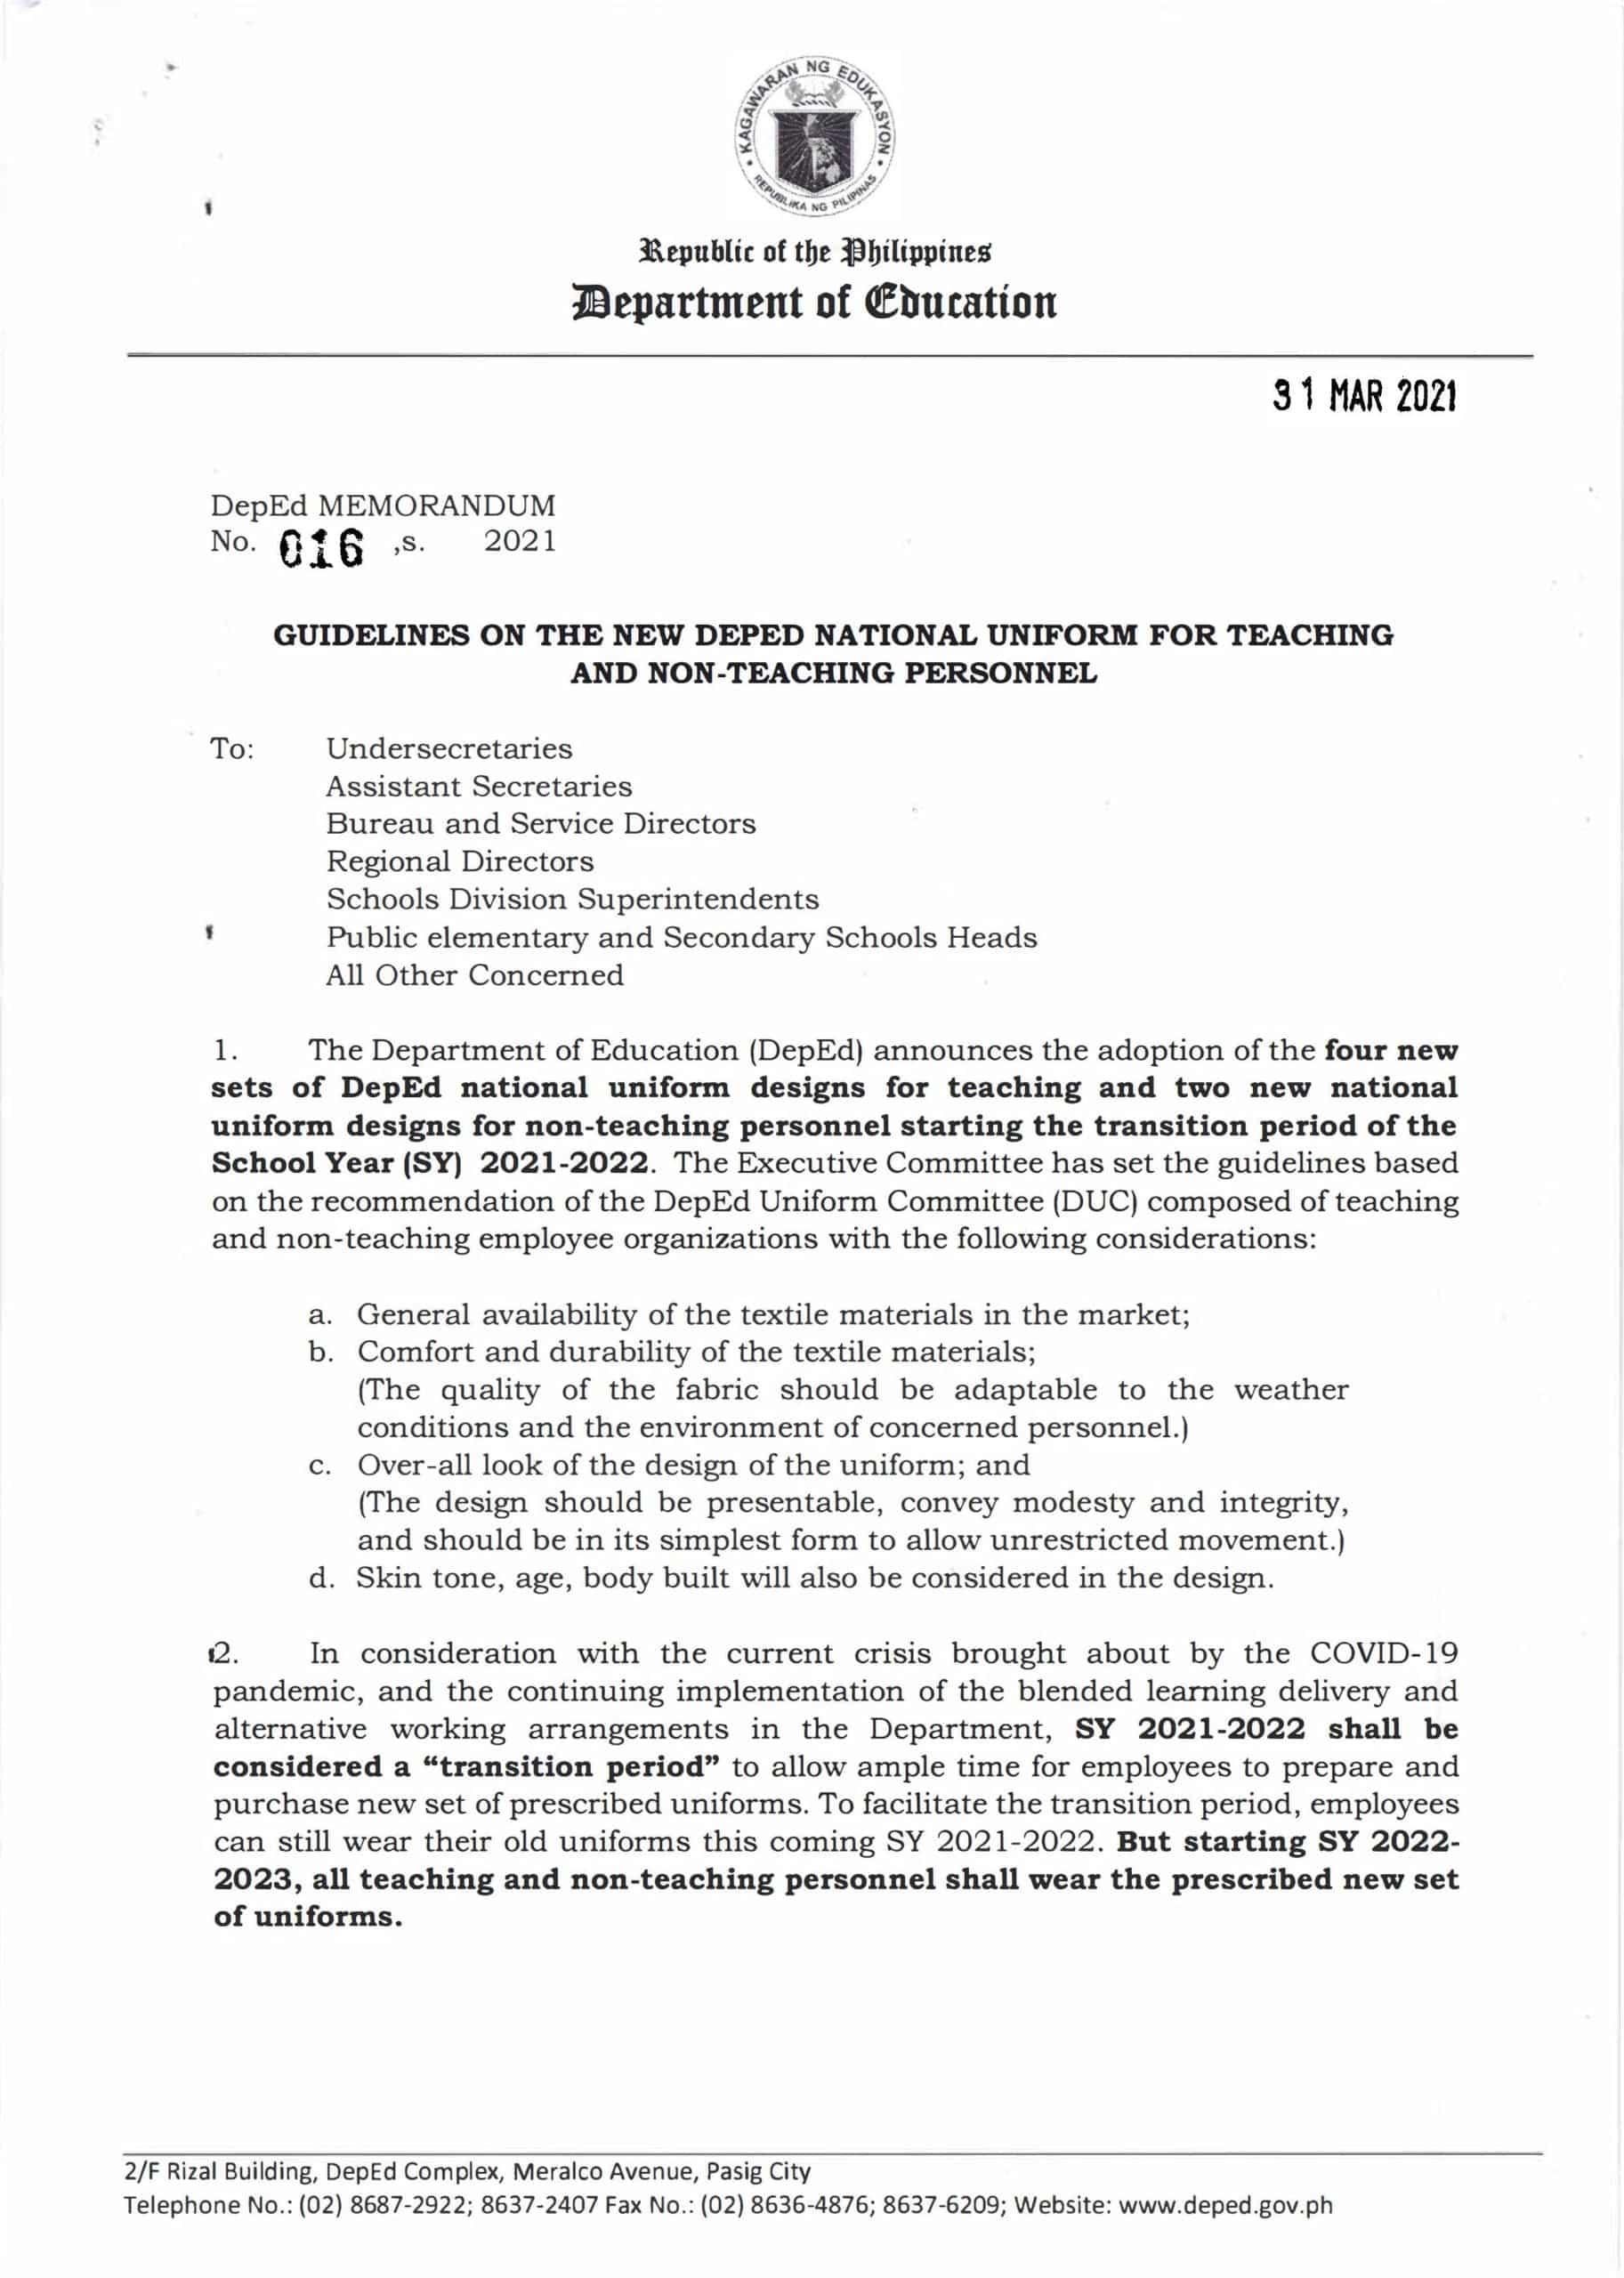 application letter for non teaching personnel